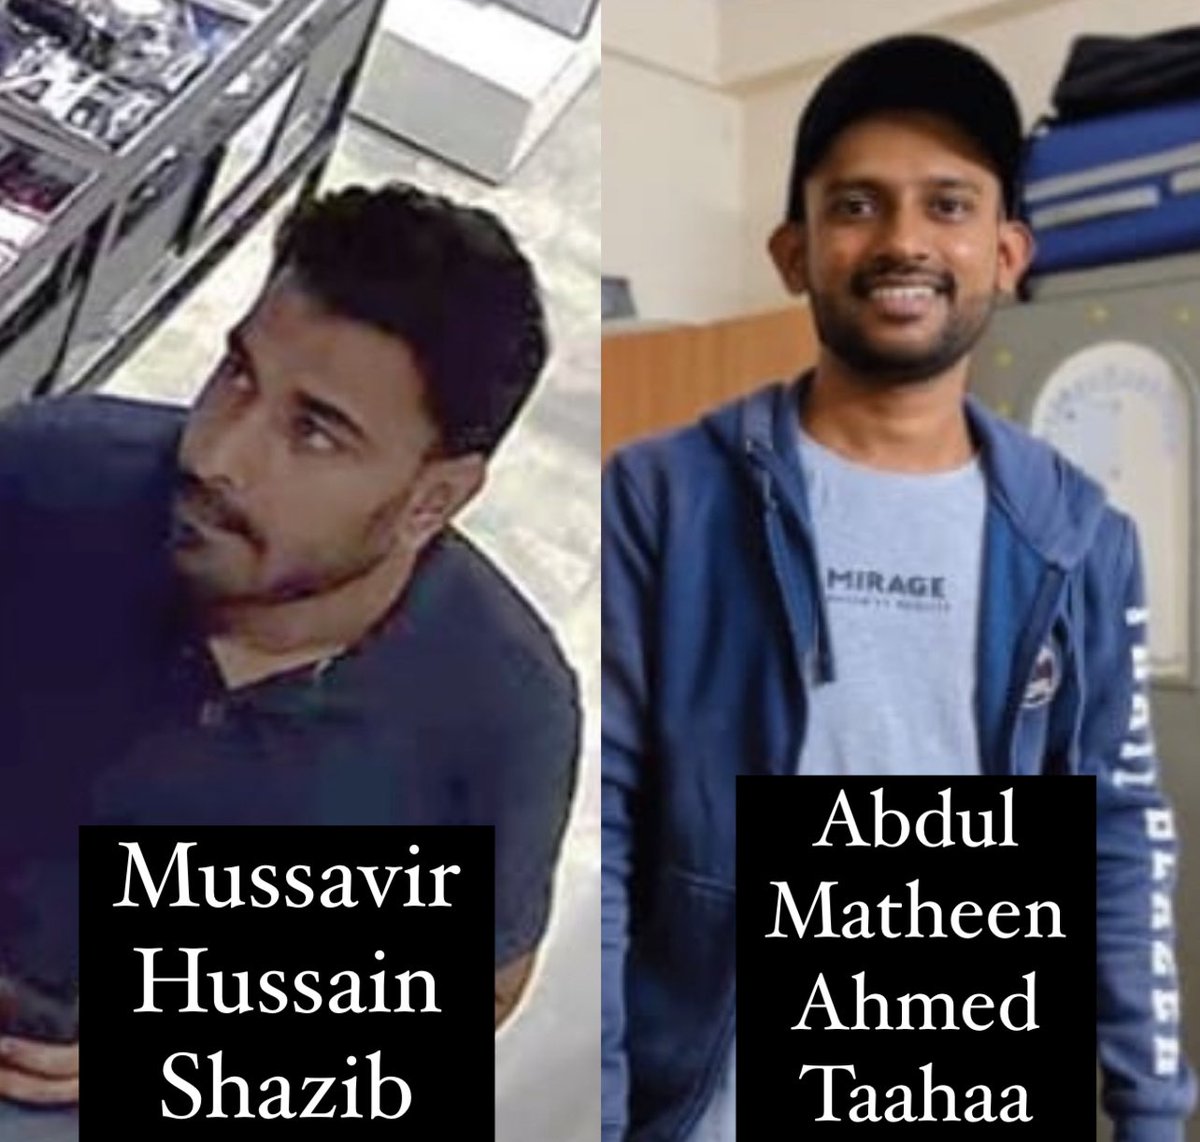 Mussavir Hussain Shazib & Abdul Matheen Ahmed Taahaa, the two main suspects in #RameshwaramCafeBlast case have 
been detained by NIA in West Bengal. 

Has Bengal become a safe heaven for terrorists?